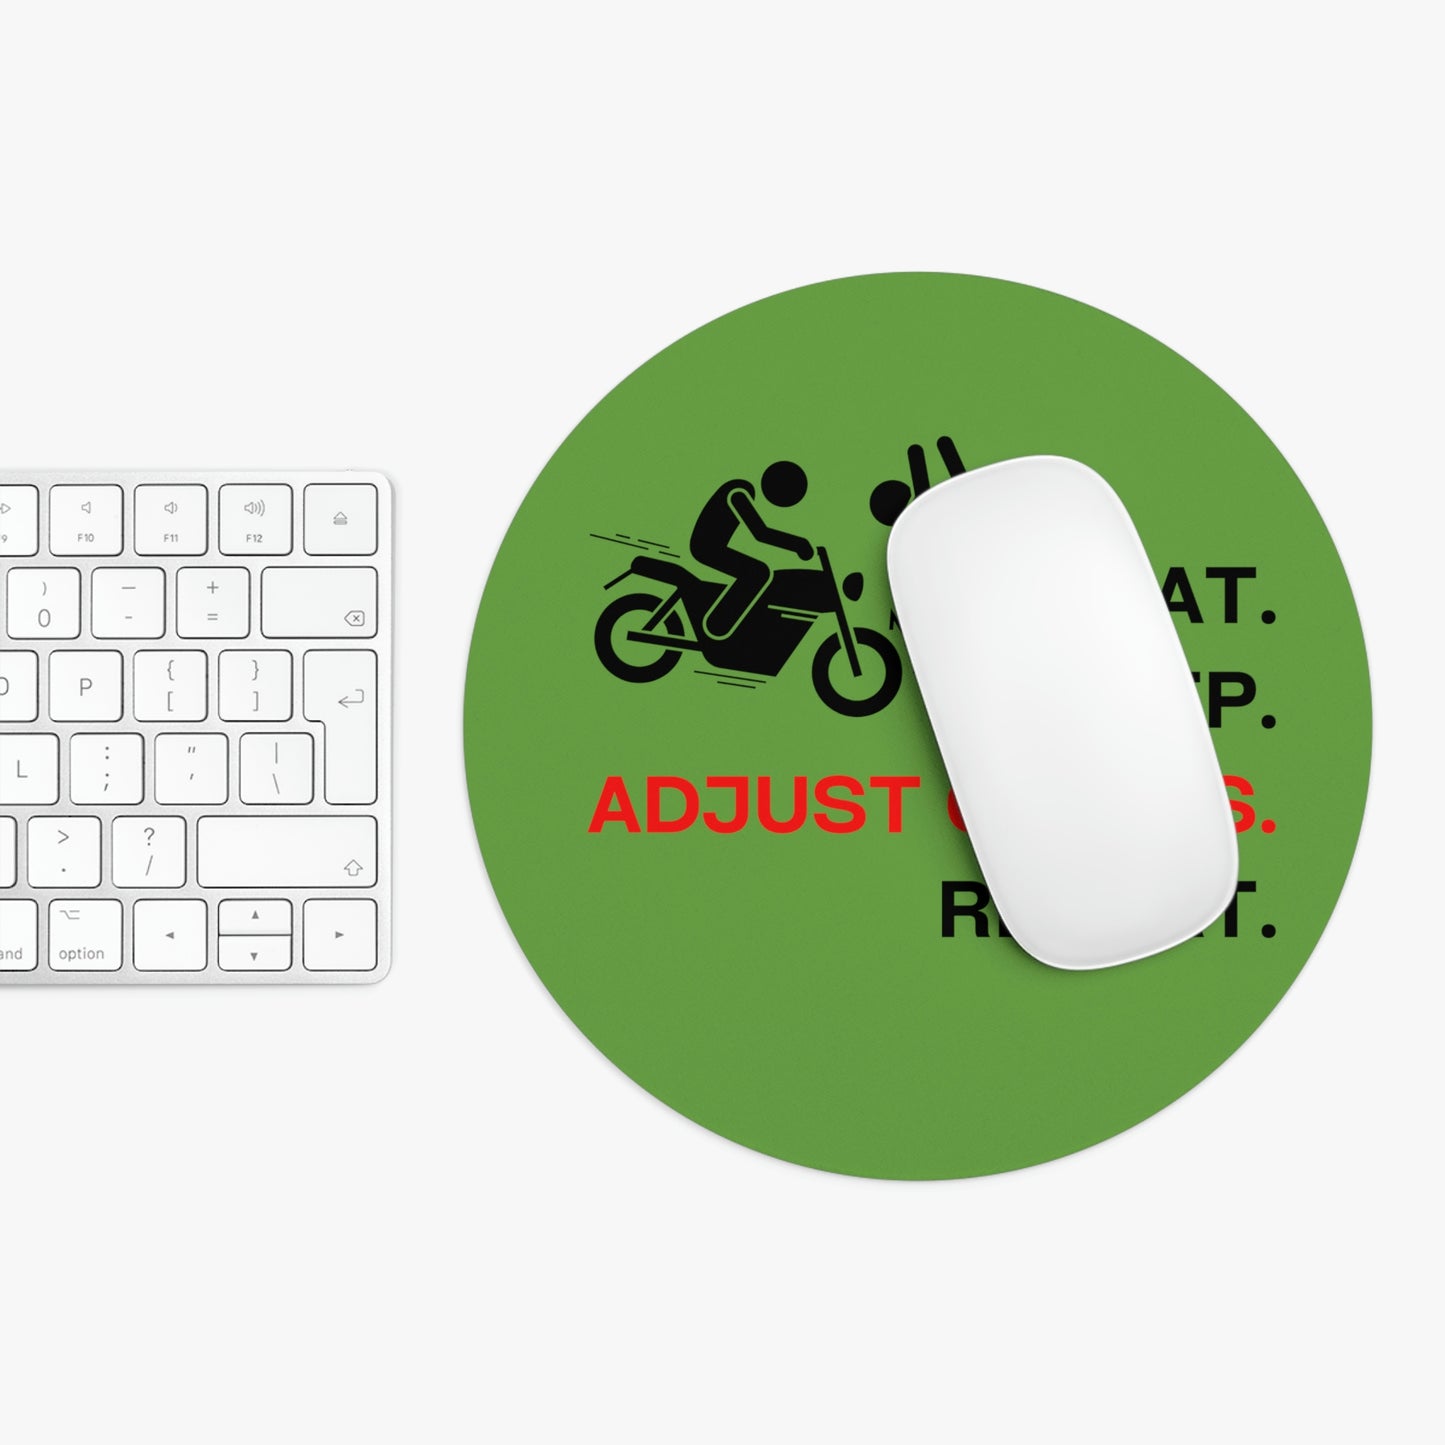 Claims Adjuster (Motorcyclist/Pedestrian/Green) Mouse Pad